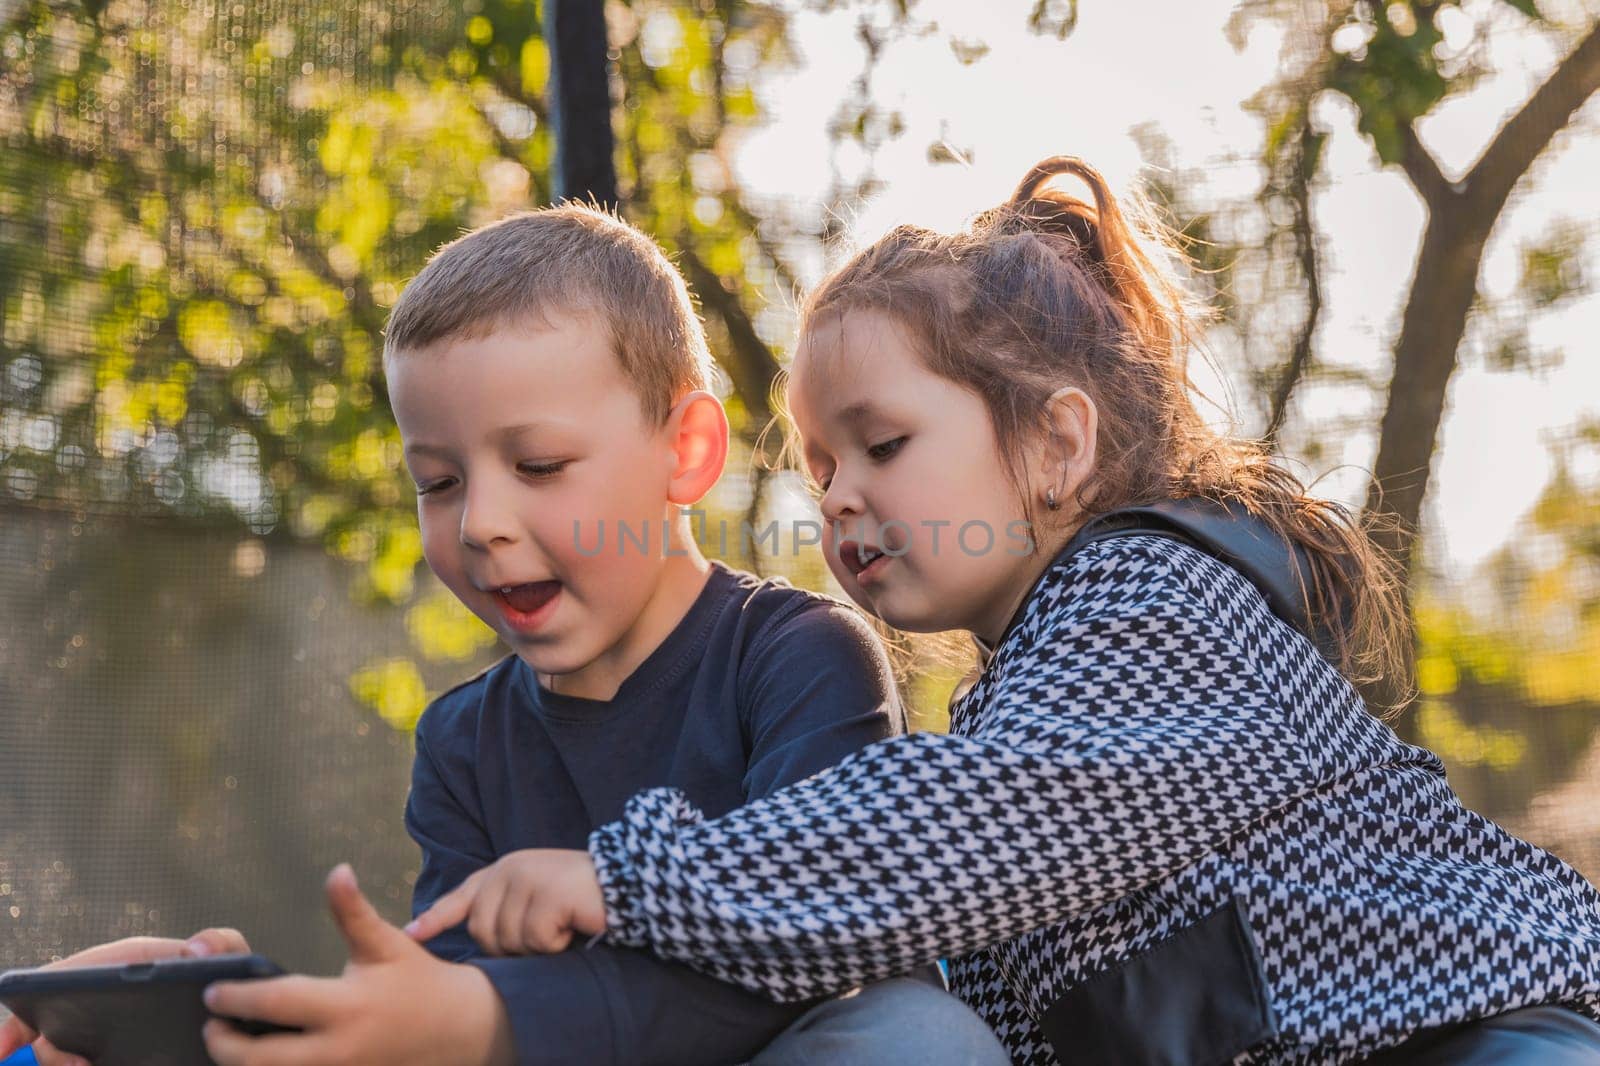 children sit on a trampoline and look at the phone by zokov